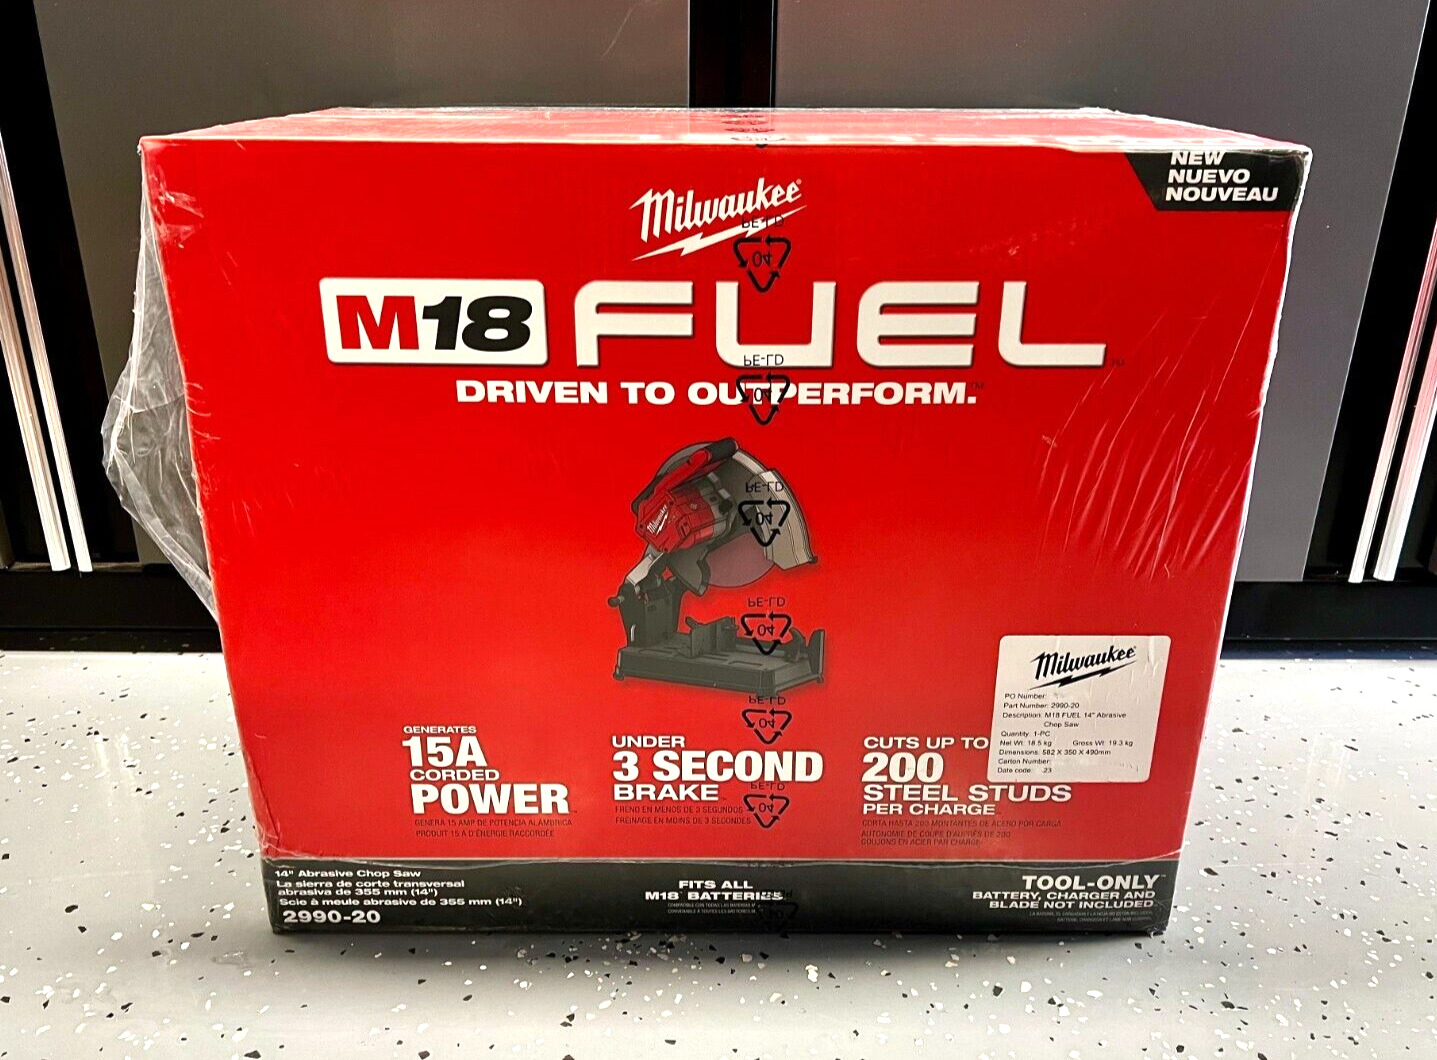 Milwaukee 2990-20 M18 Fuel 14" Brushless Abrasive Chop Saw- Bare Tool Only (new)